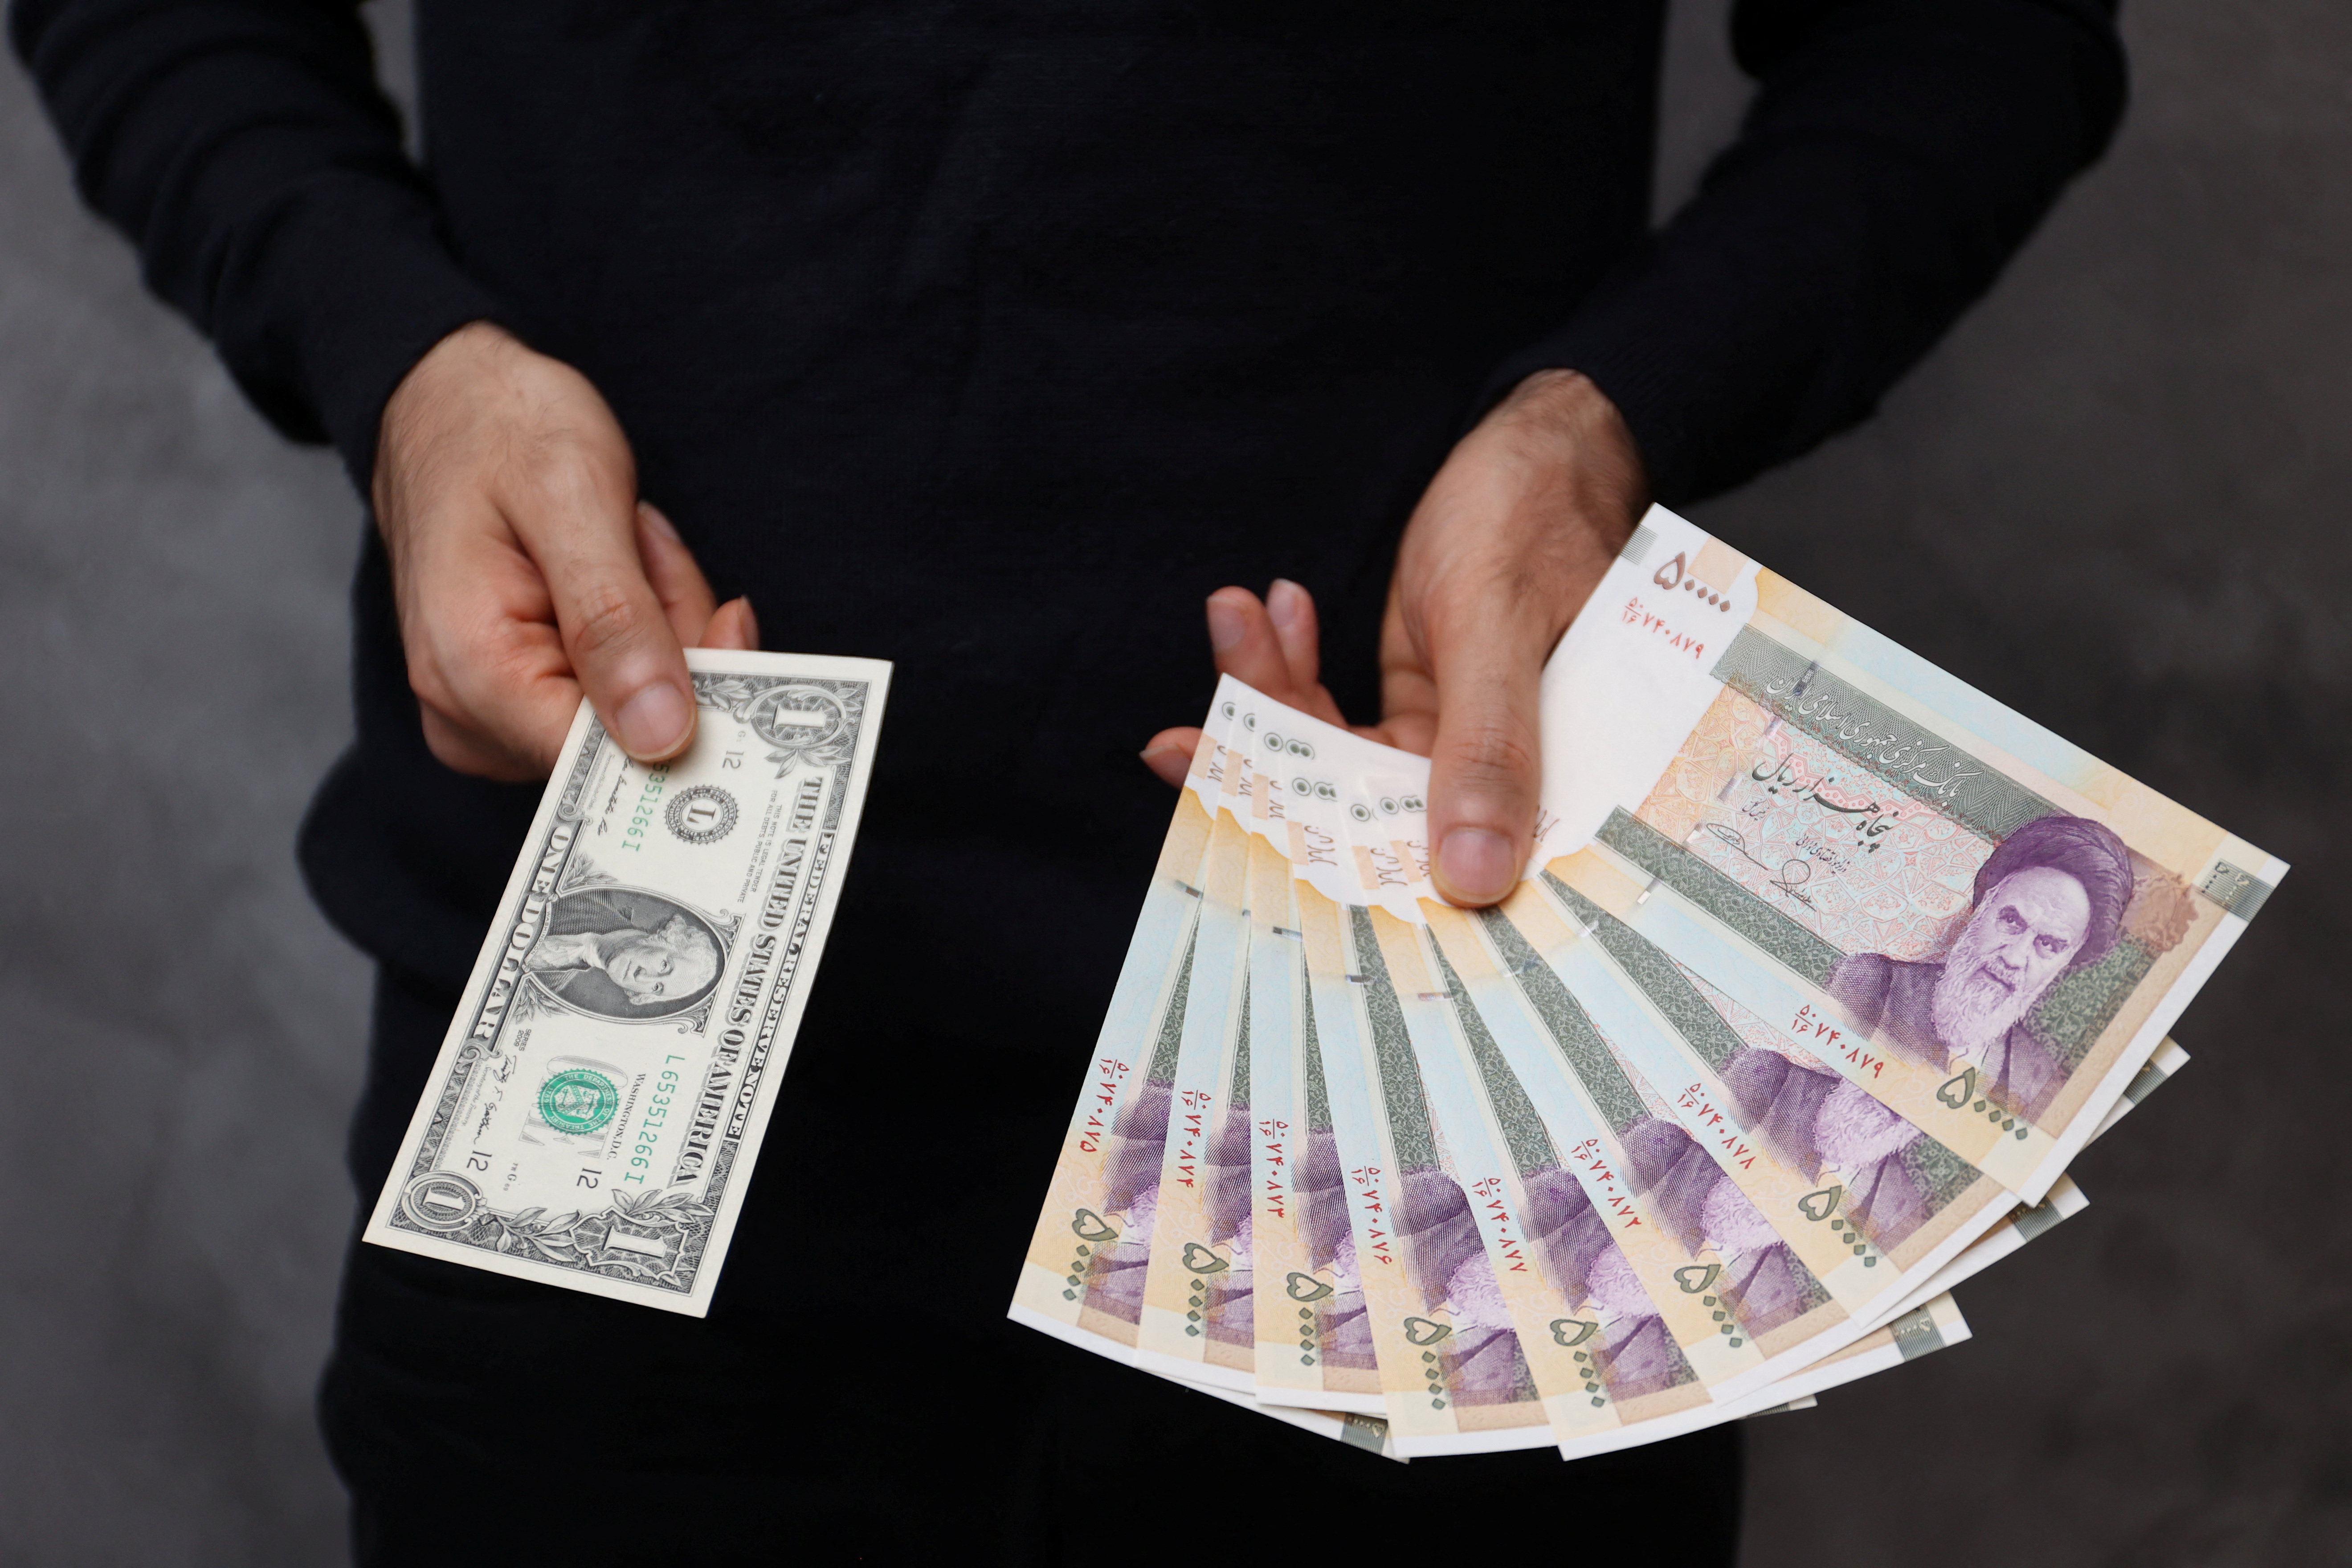 A currency dealer holds U.S. dollars and Iranian rials in an exchange shop in Tehran